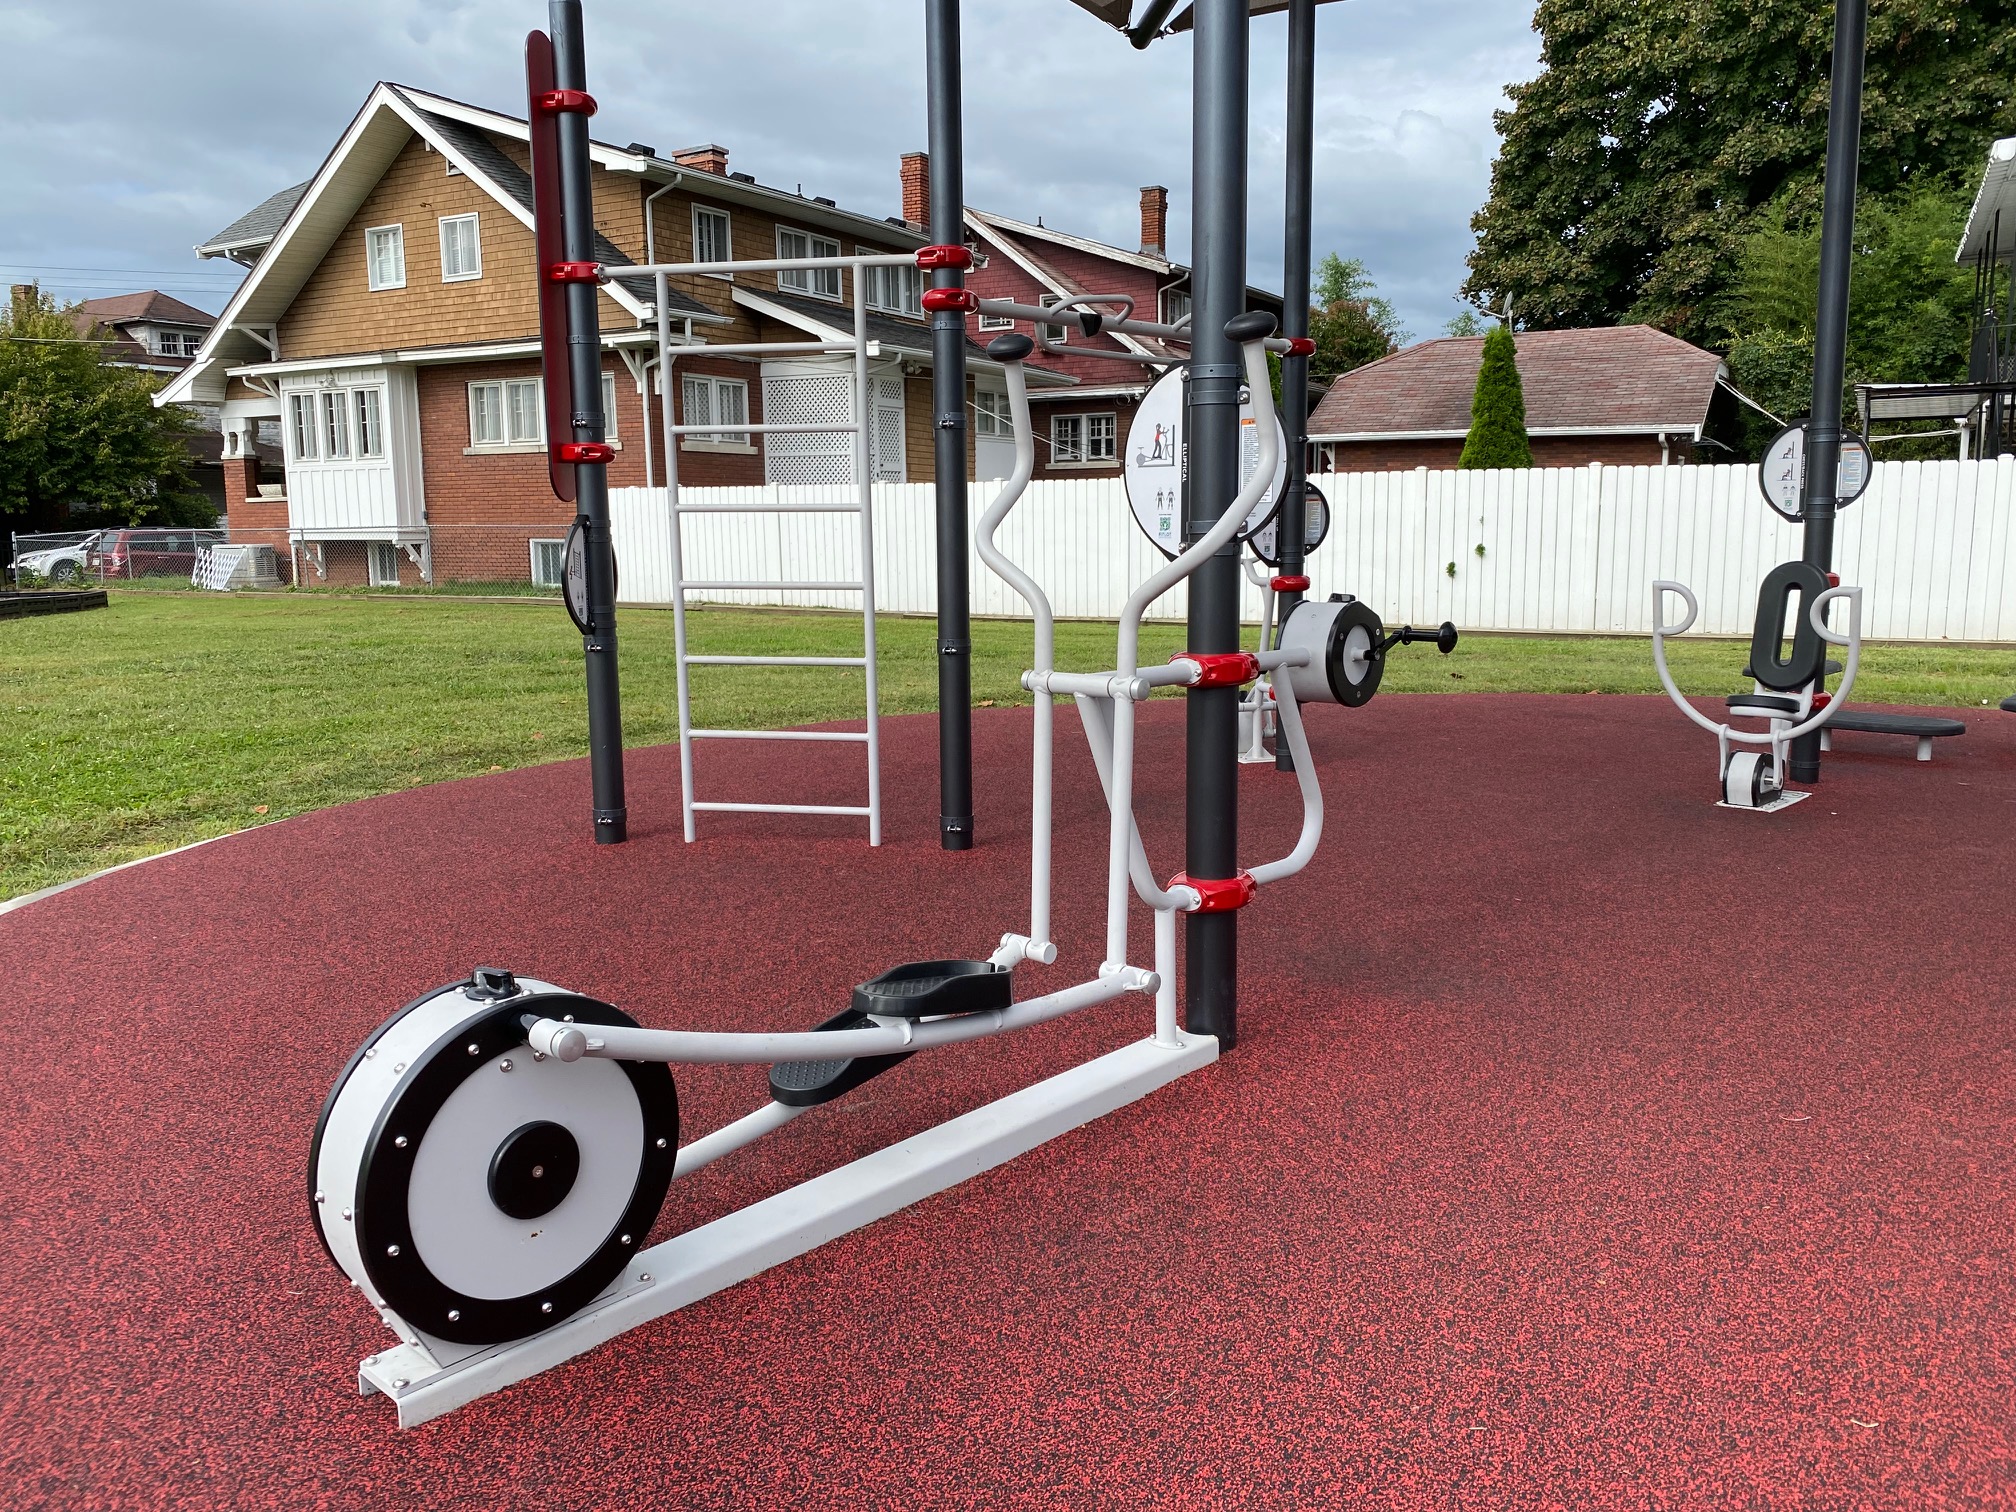 AARP welcomes first outdoor fitness park in Charleston - WV MetroNews